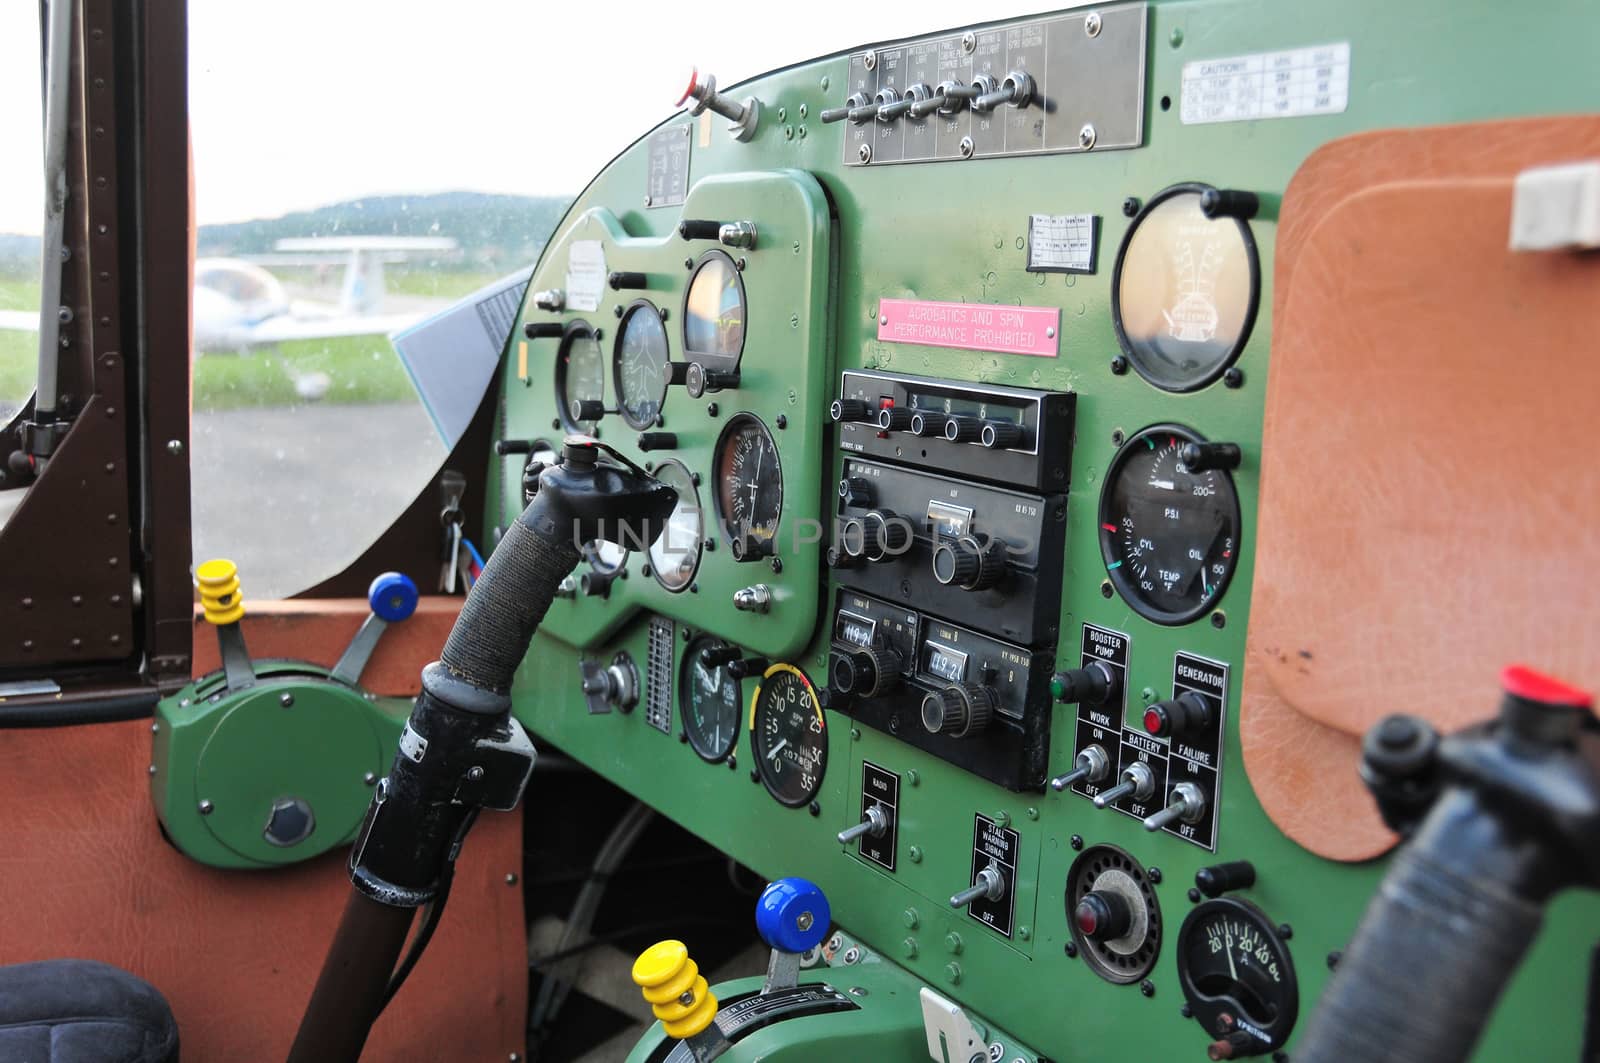 Instrument panel in small sport aircraft by asafaric